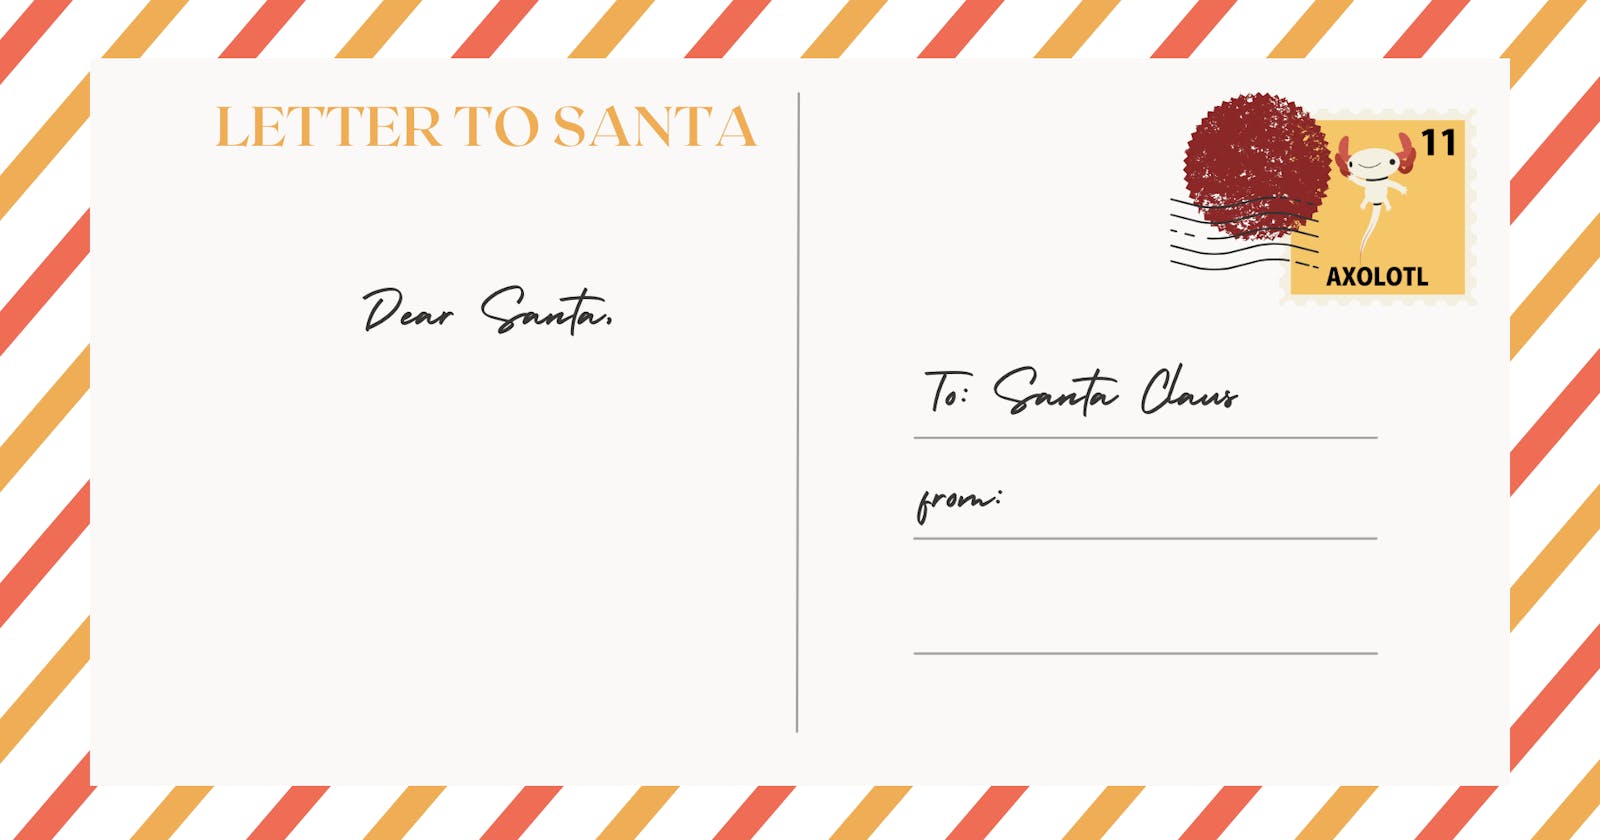 Write your letter to Santa Claus, here! 🎅